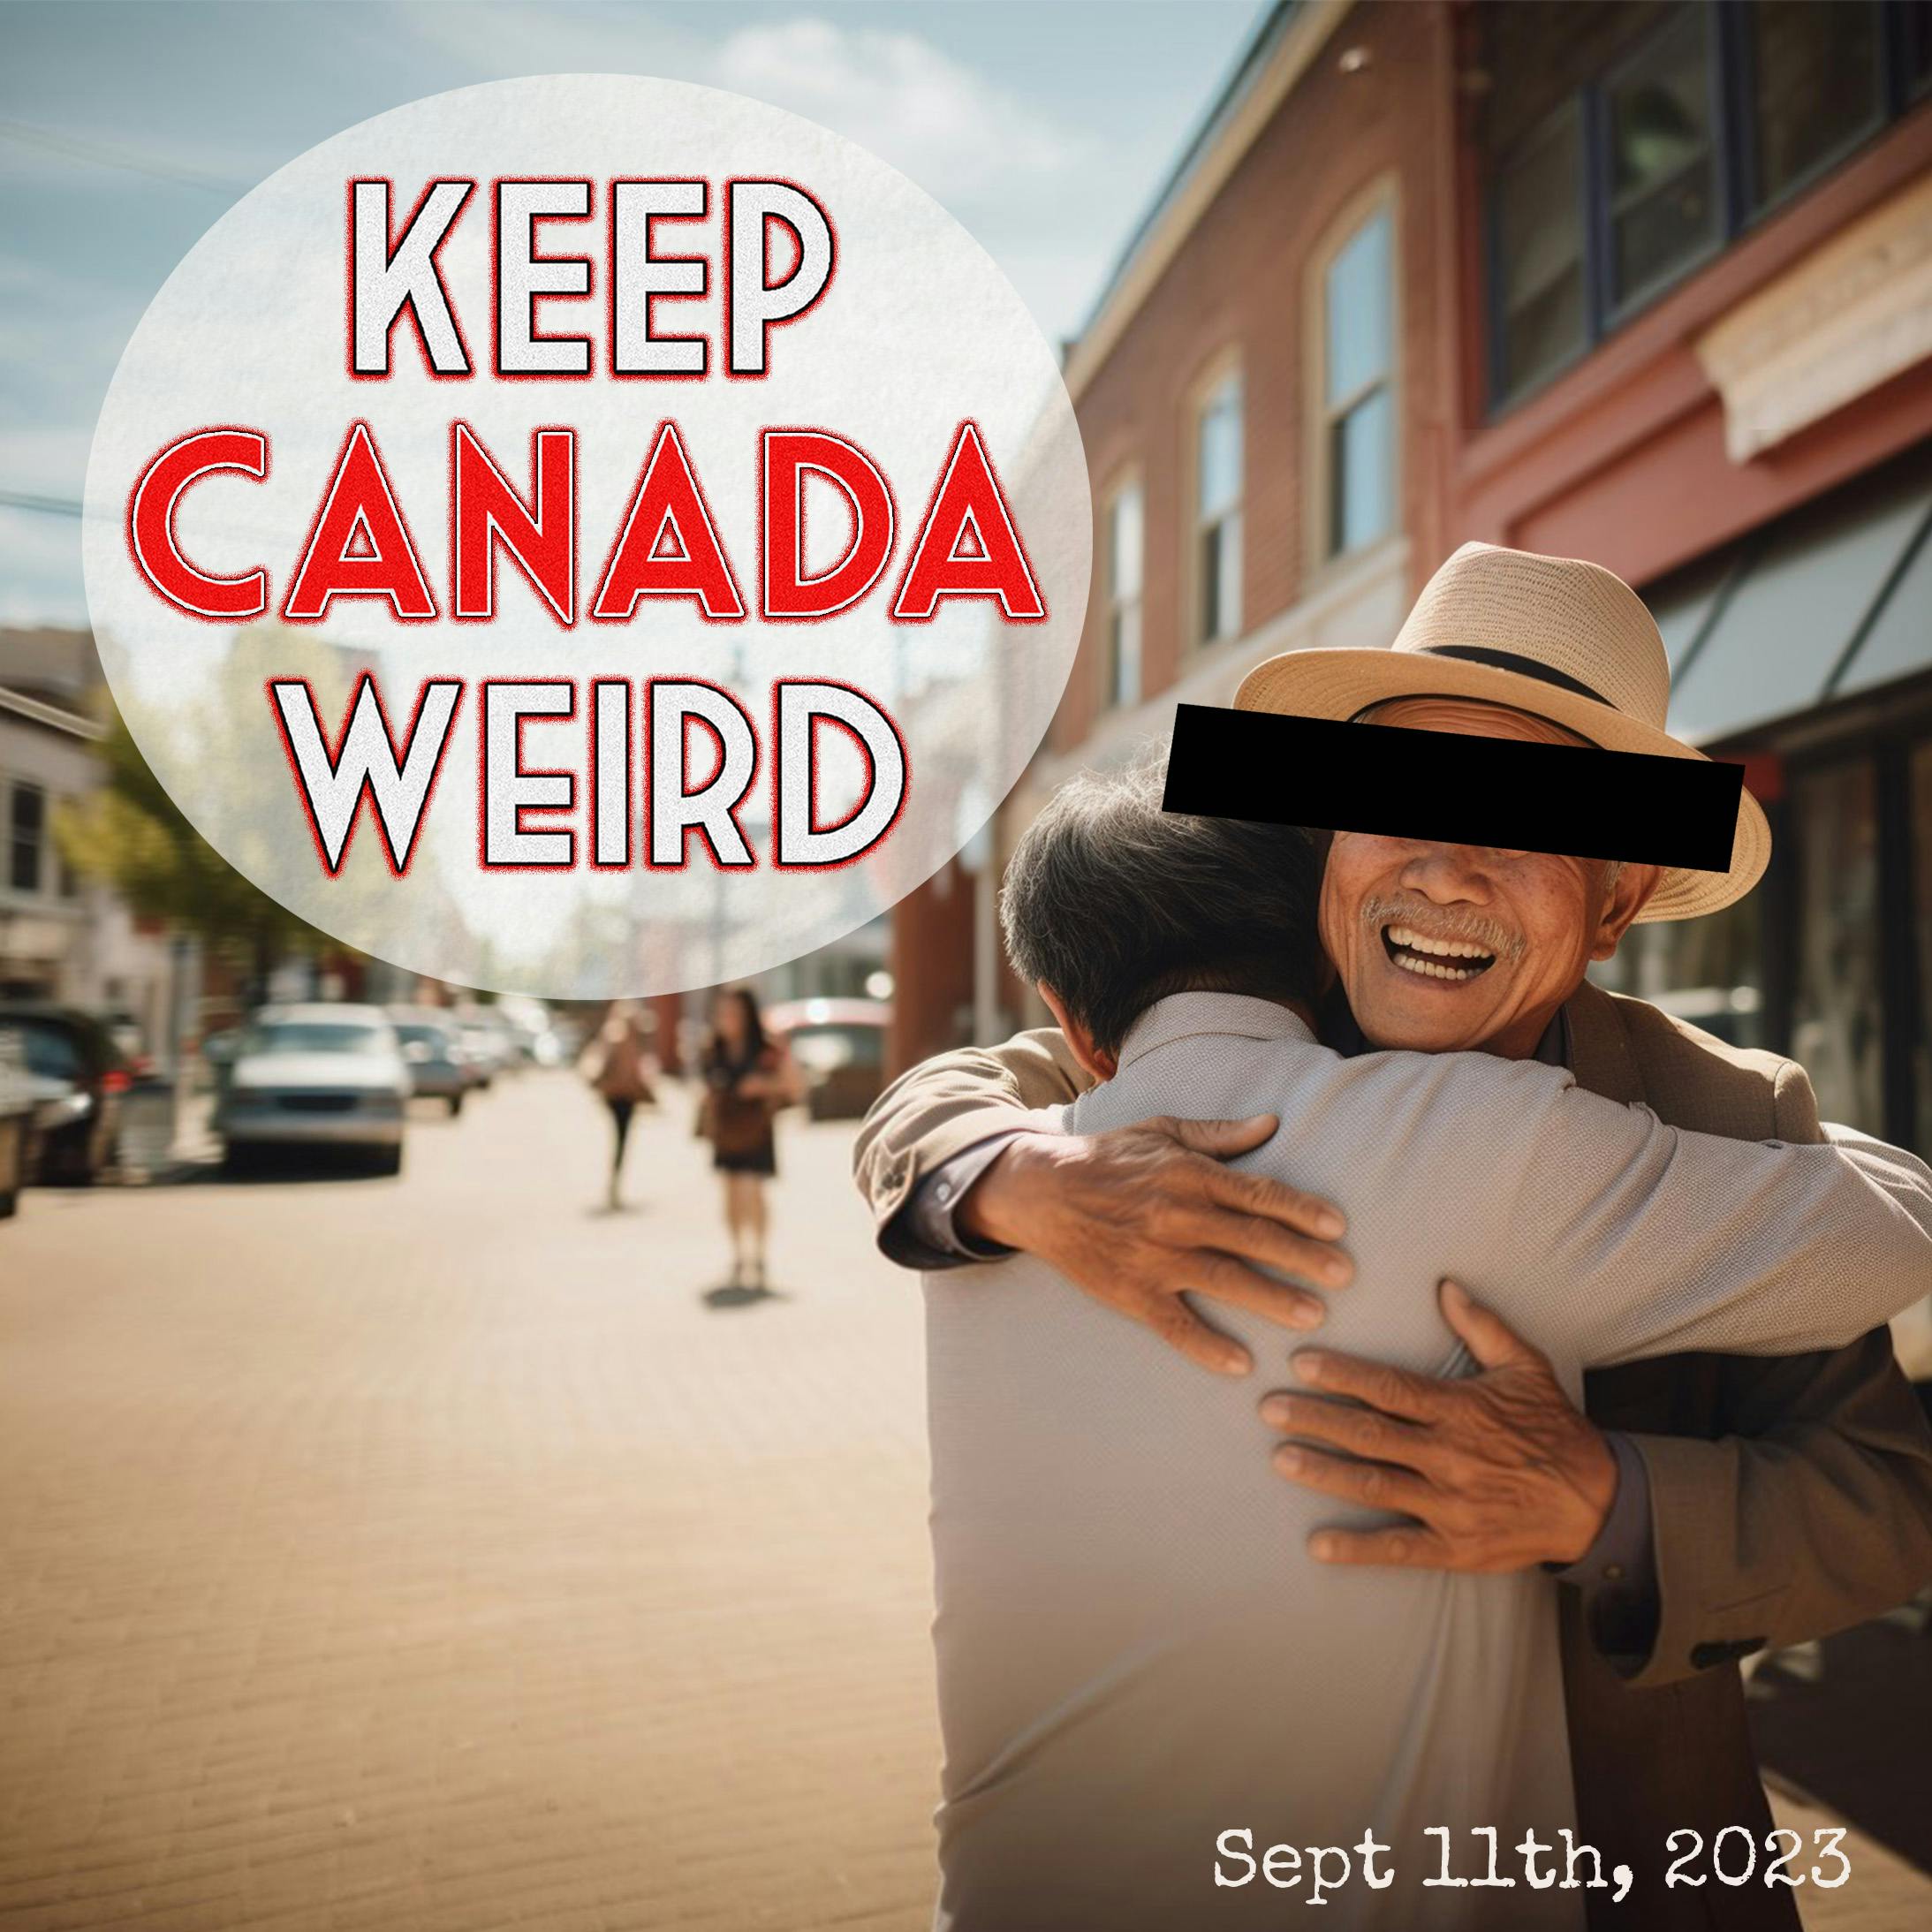 KEEP CANADA WEIRD - Sept 12th, 2023 - unwanted hugs in PEI, a stolen feather in Guelph, coyotes vs man, the one chip challenge